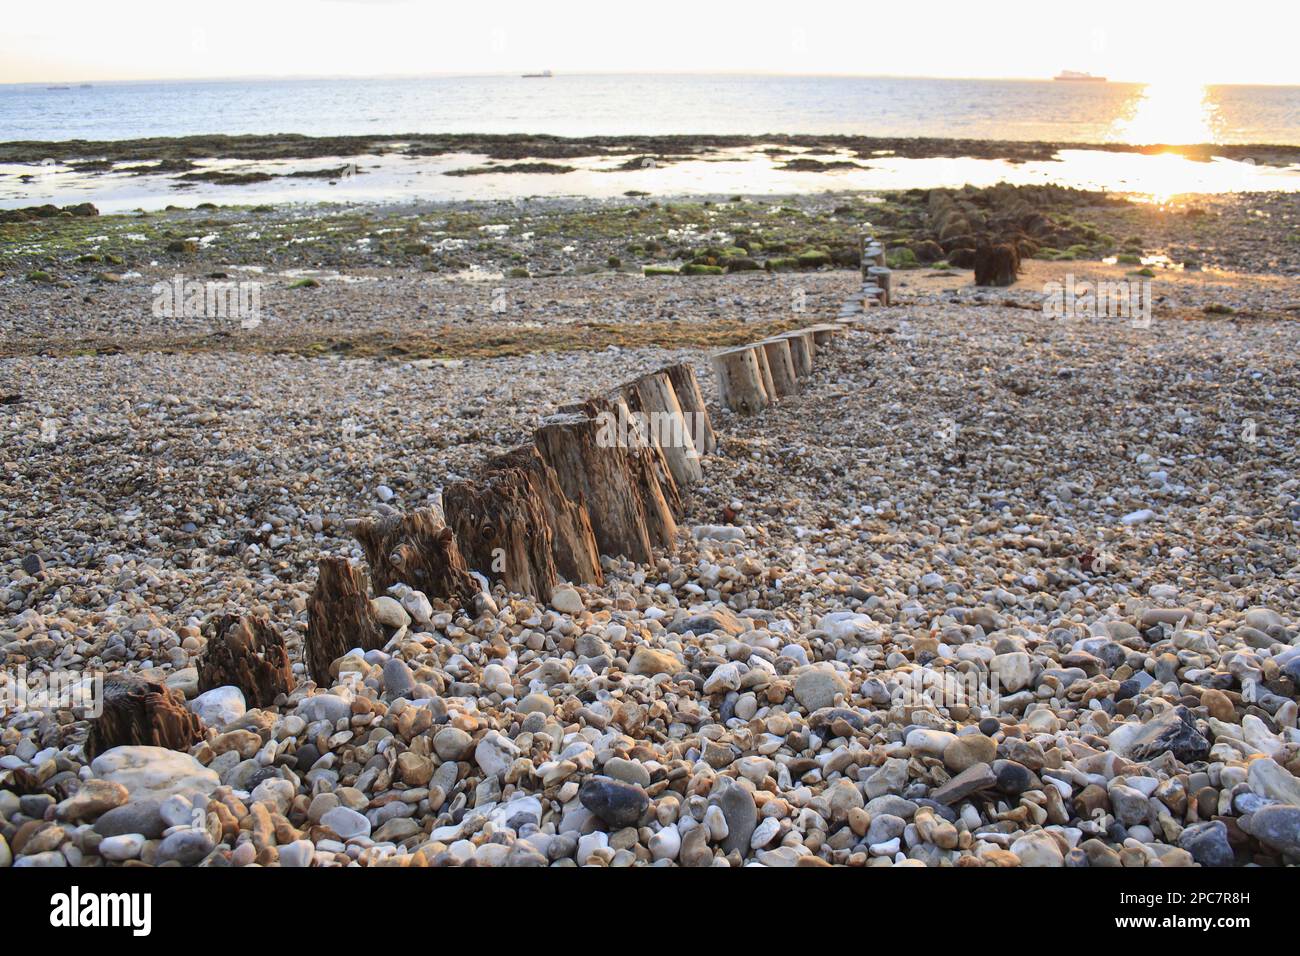 Remains of breakwater on beach with incoming tide at dawn, Bembridge, Isle of Wight, England, United Kingdom Stock Photo